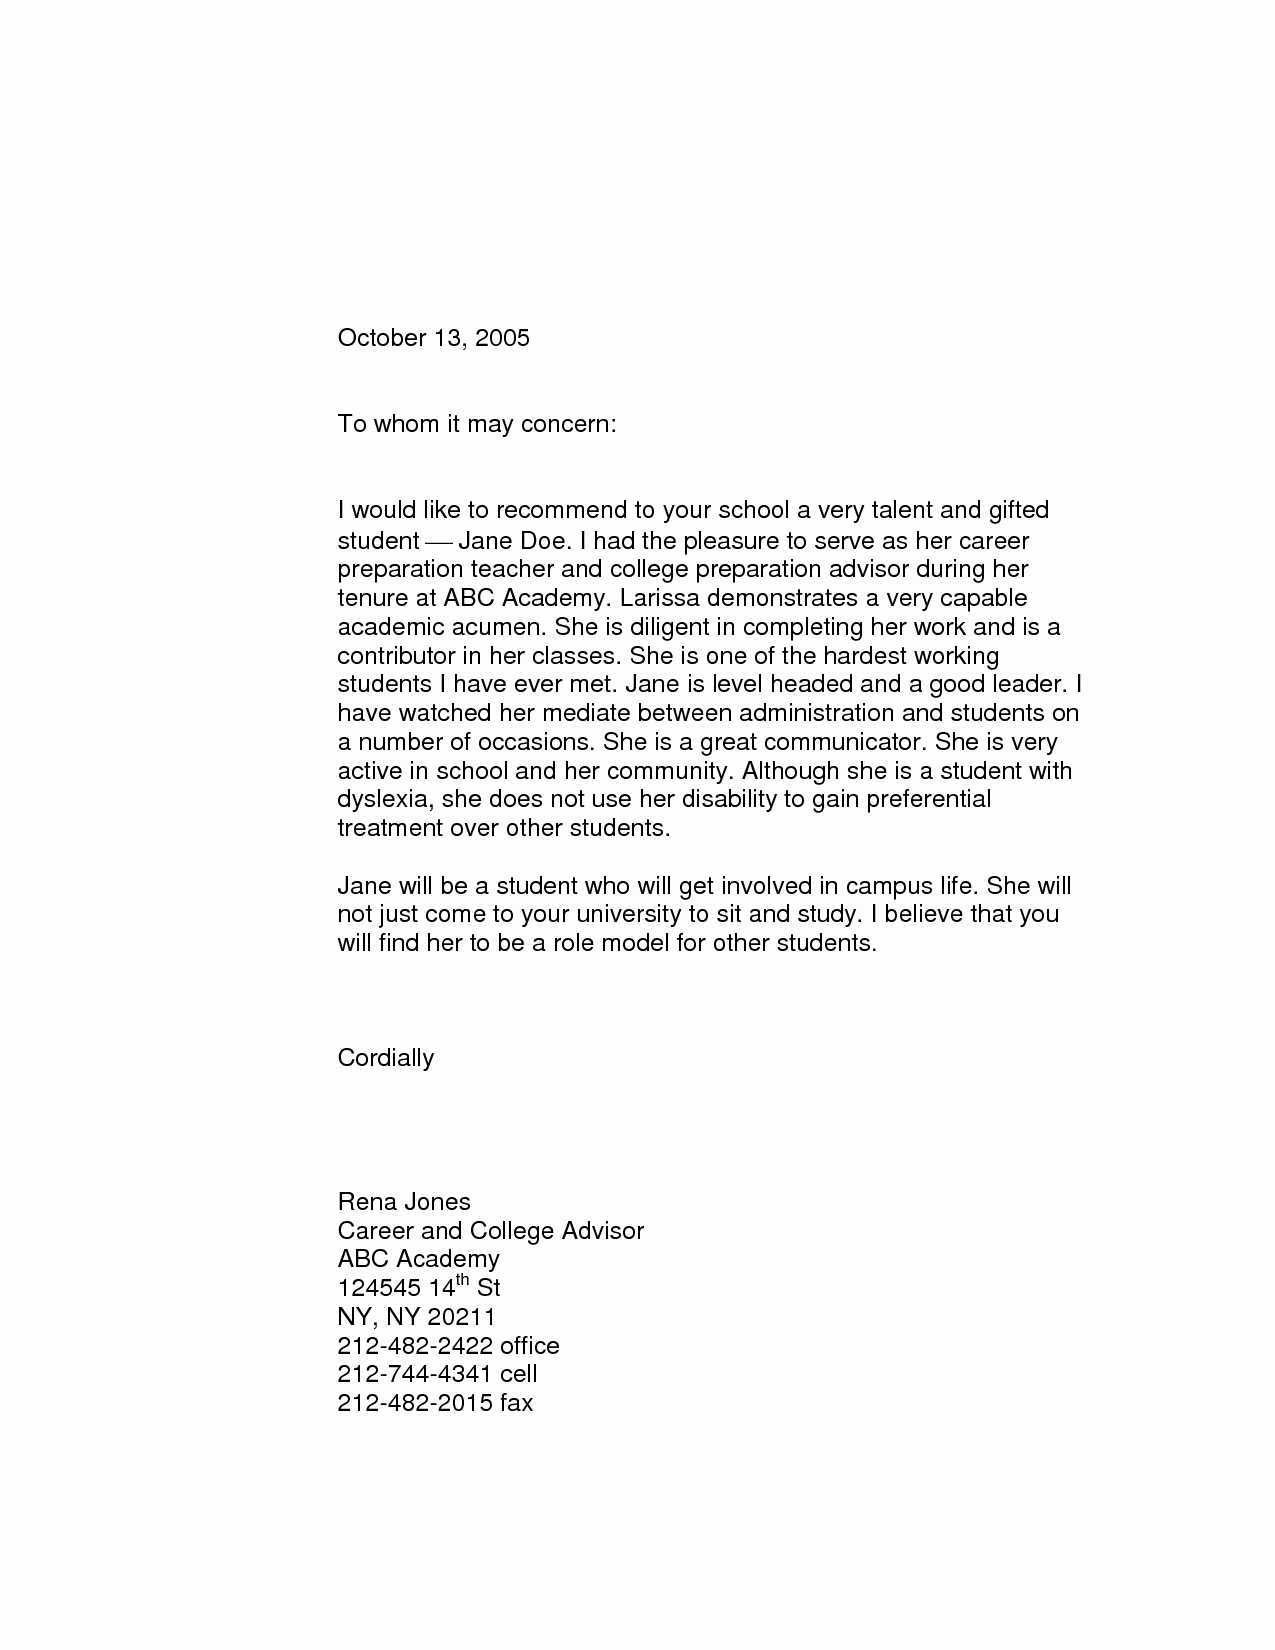 Letters Of Recommendation format Samples Beautiful Sample Re Mendation Letters